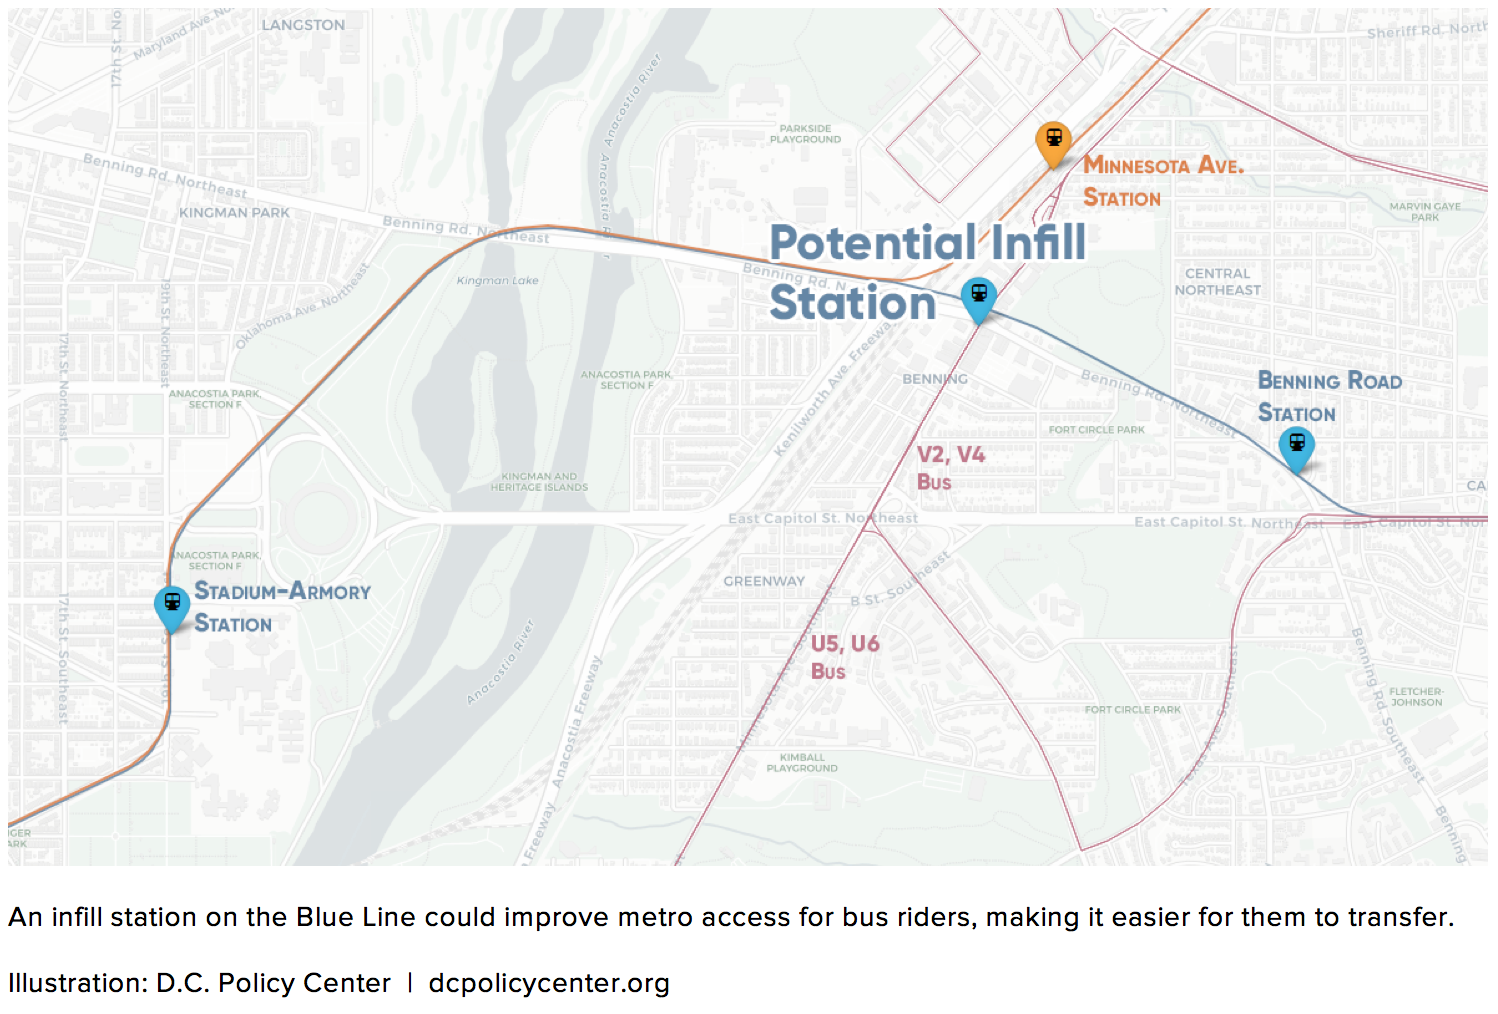 An infill station on the Blue Line could improve metro access for bus riders, making it easier for them to transfer.